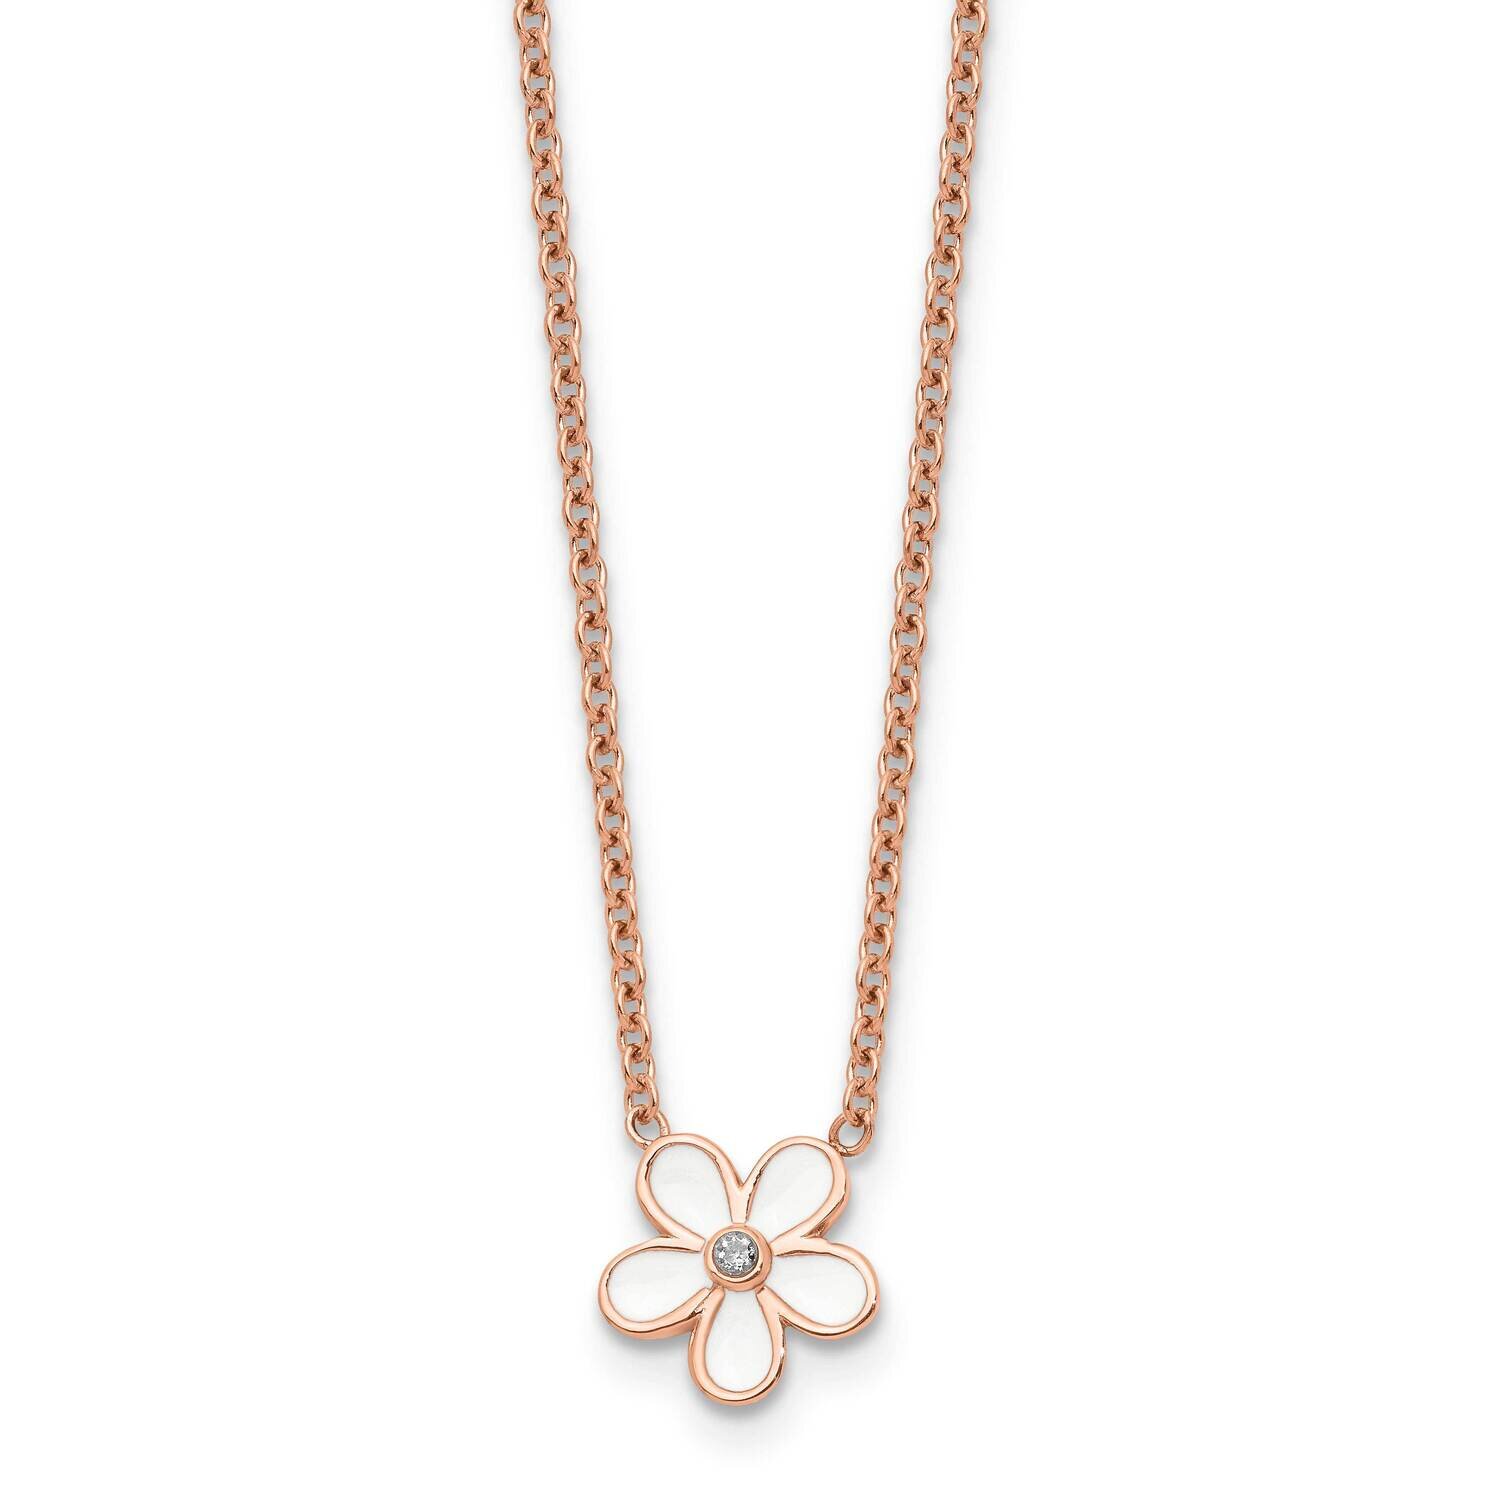 Pink IP-plated Enameled Flower CZ Stone Stone Necklace Stainless Steel Polished SRN1553-17.25